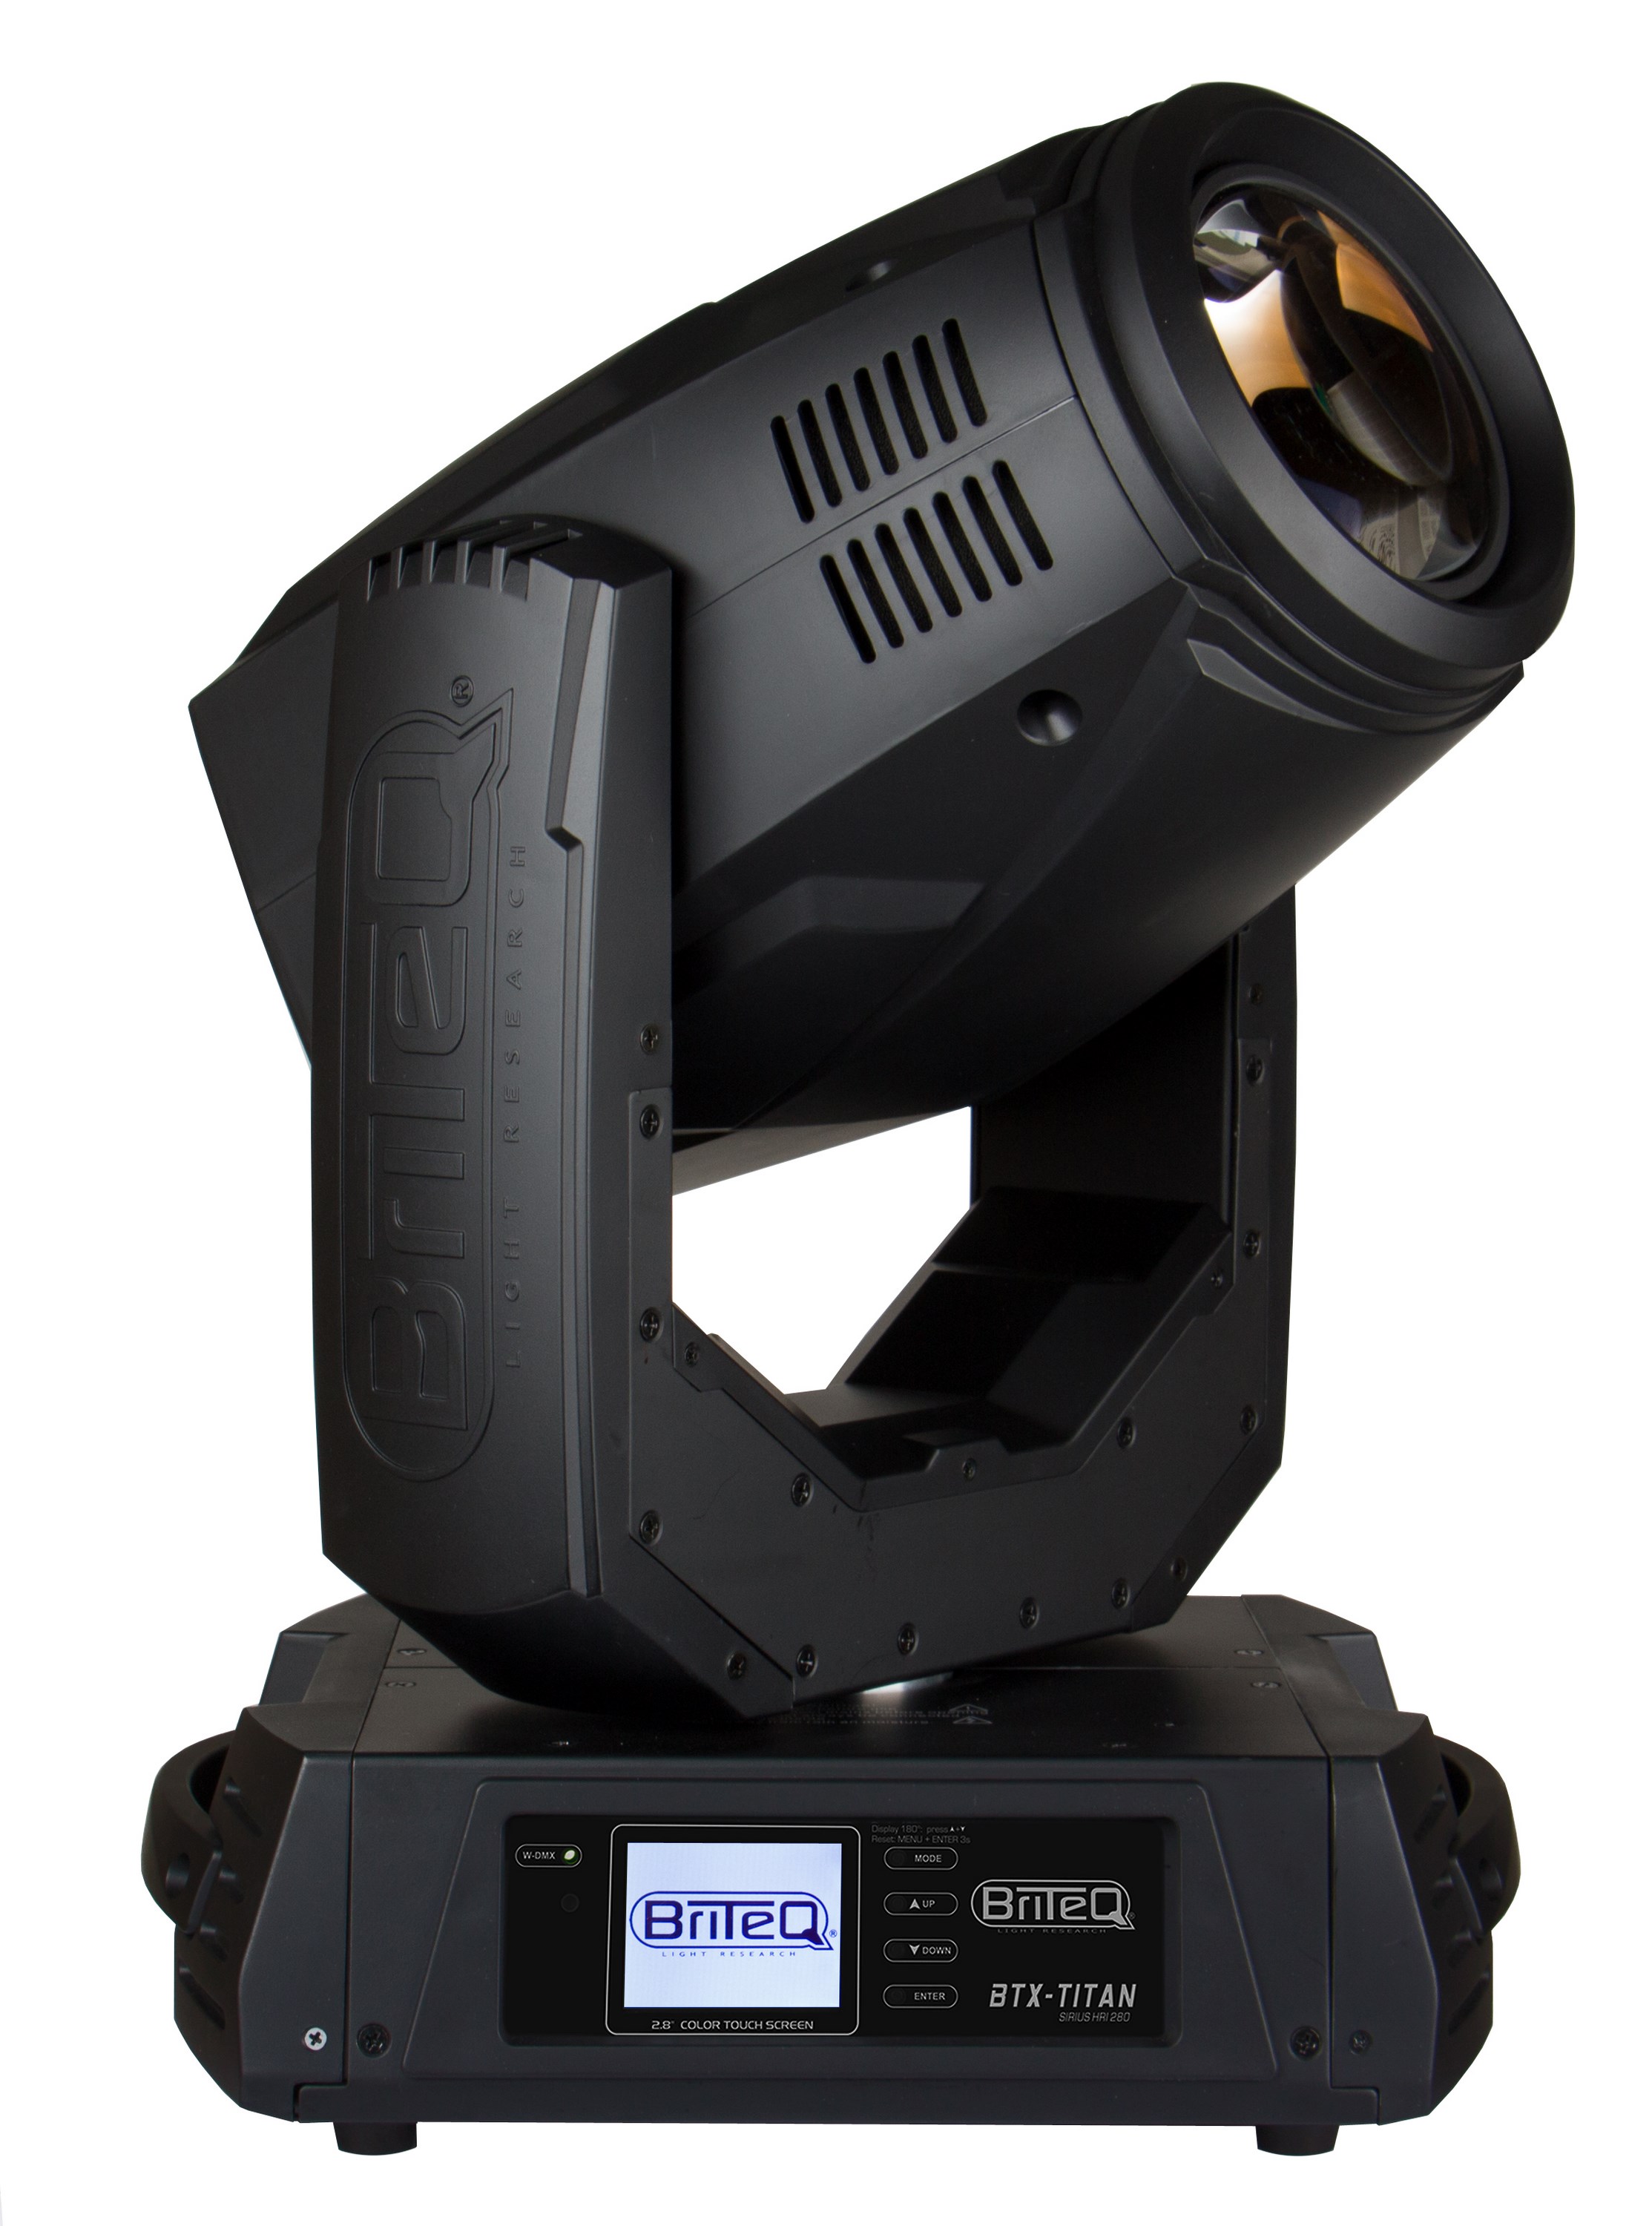 Perfect for rental companies: this projector has BEAM + SPOT + WASH in 1 UNIT !